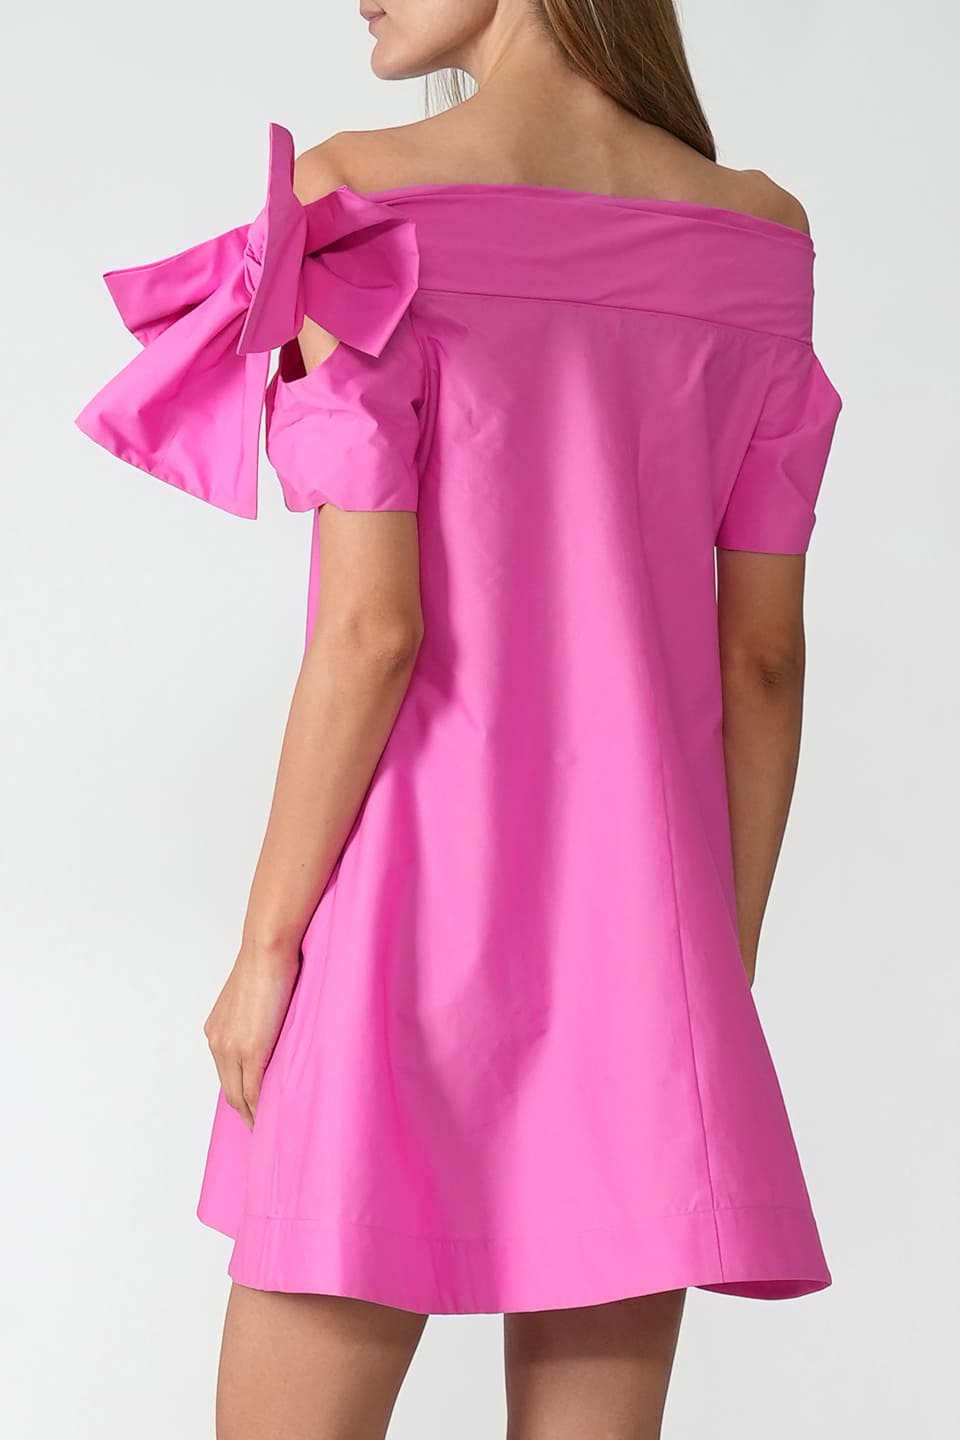 Designer Pink Mini dresses, shop online with free delivery in UAE. Product gallery 6